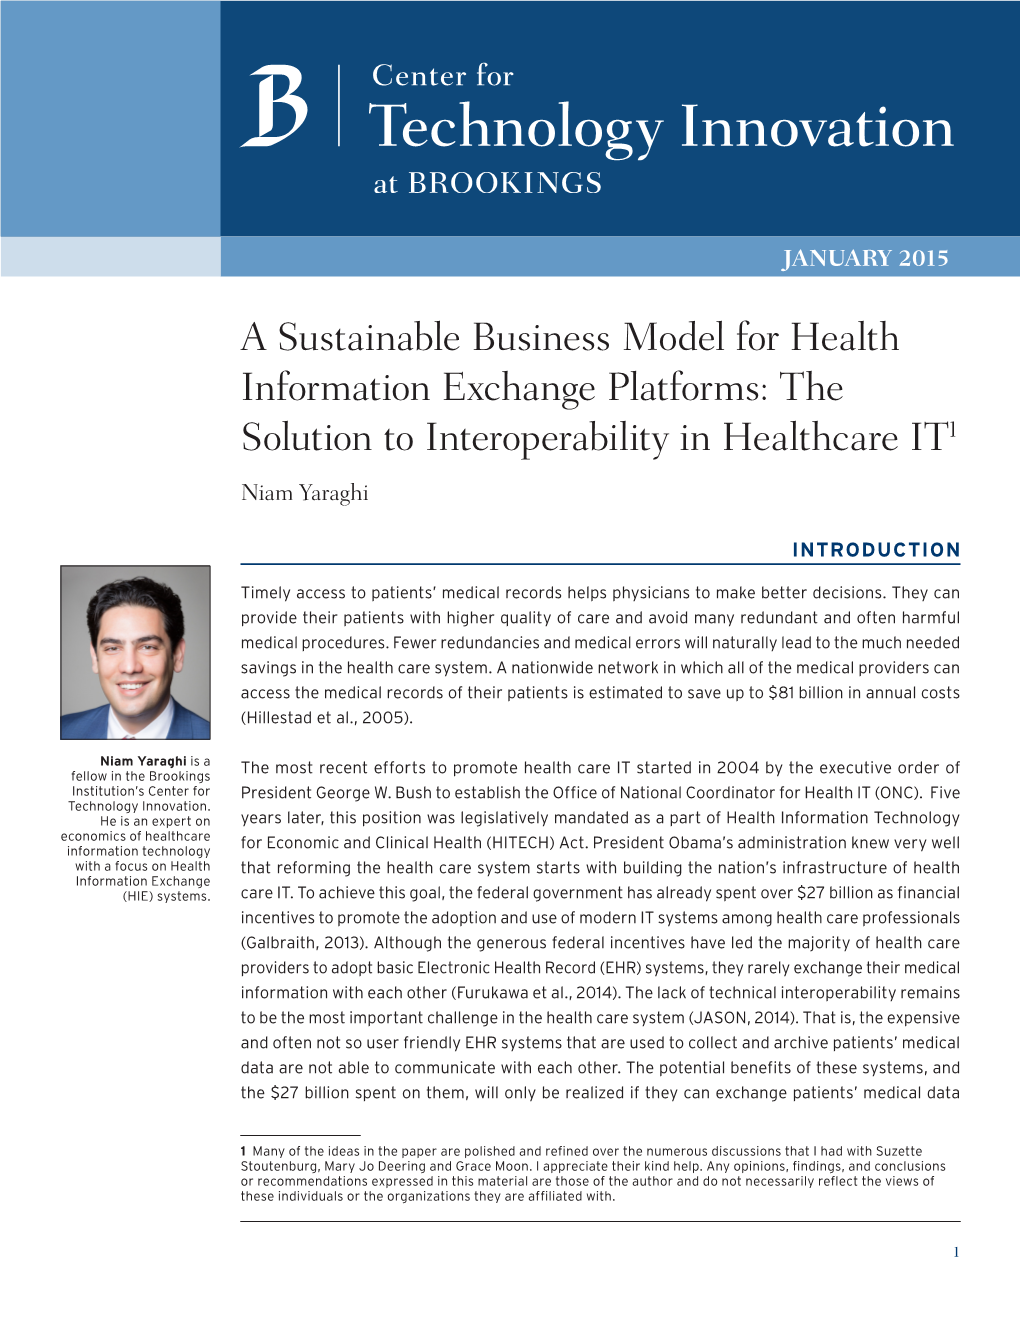 A Sustainable Business Model for Health Information Exchange Platforms: the Solution to Interoperability in Healthcare IT1 Niam Yaraghi